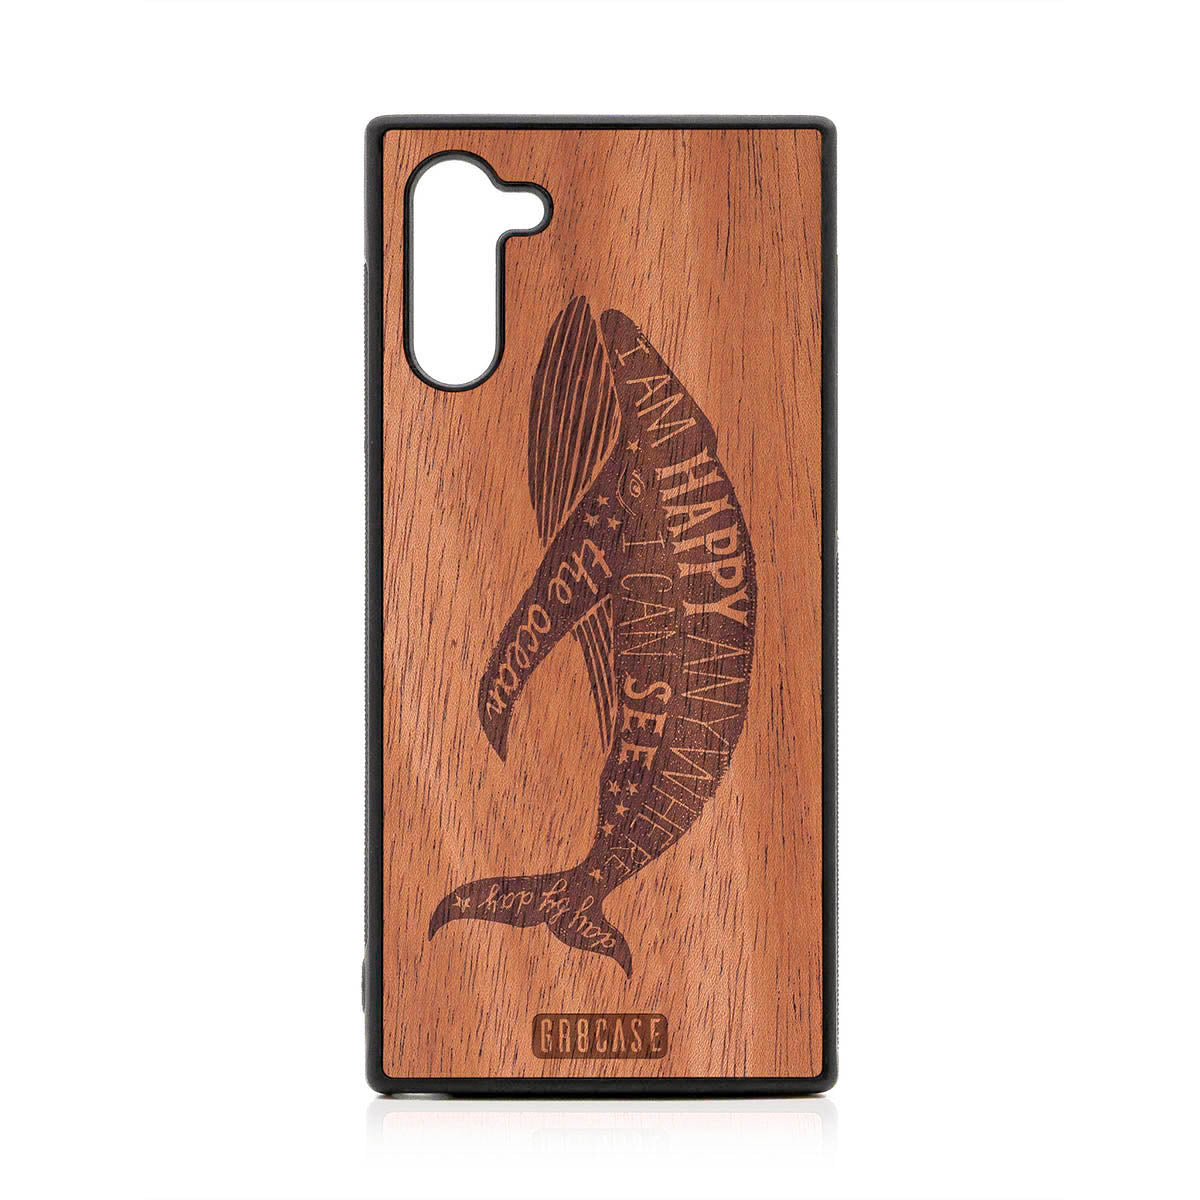 I'm Happy Anywhere I Can See The Ocean (Whale) Design Wood Case For Samsung Galaxy Note 10